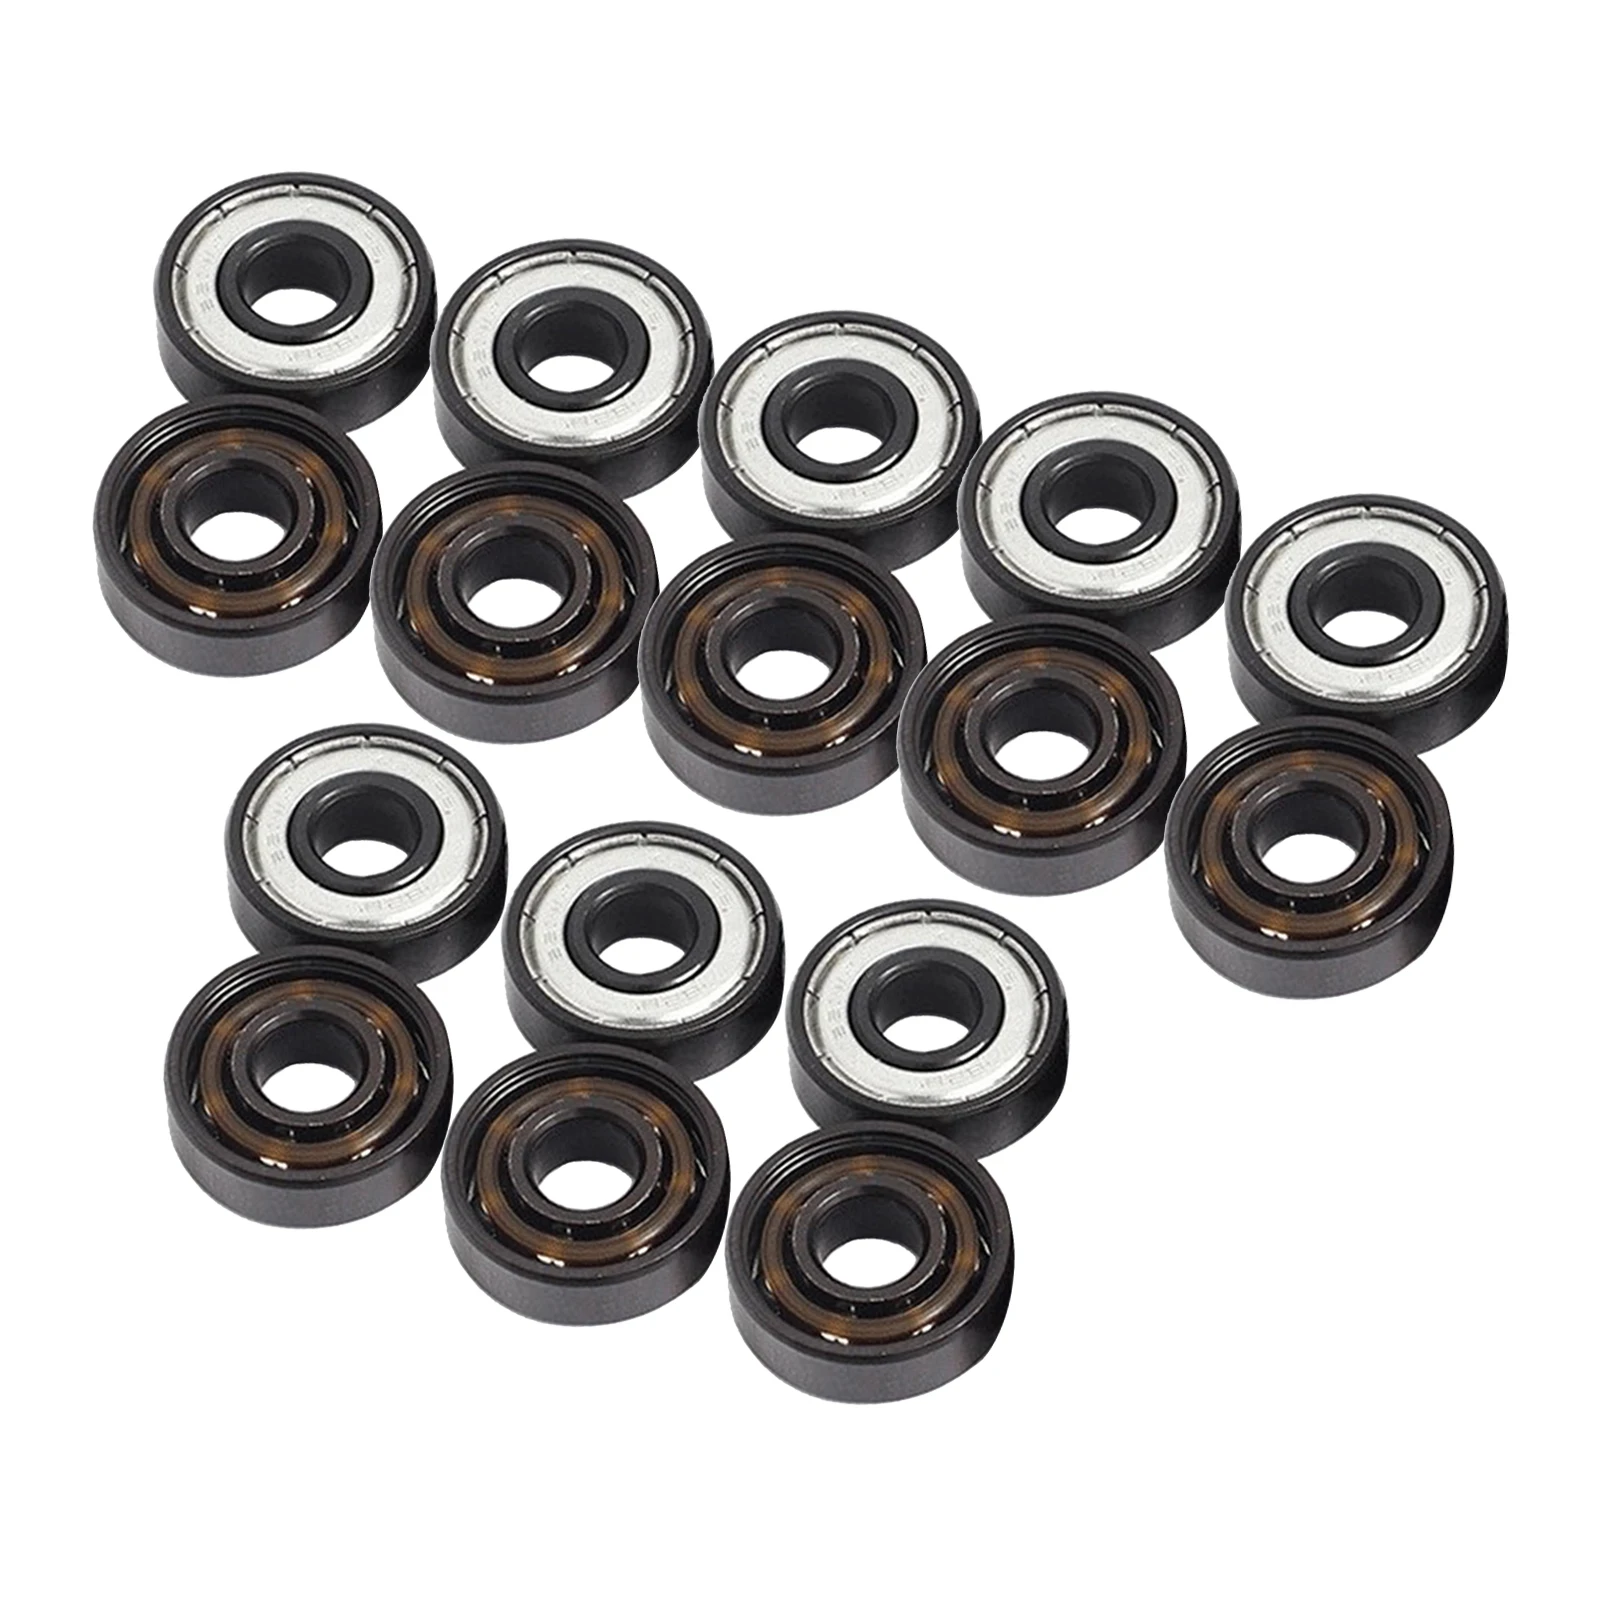 16 Pack Replacement Skateboard Bearings 8mm Scooter Wheels Accessories